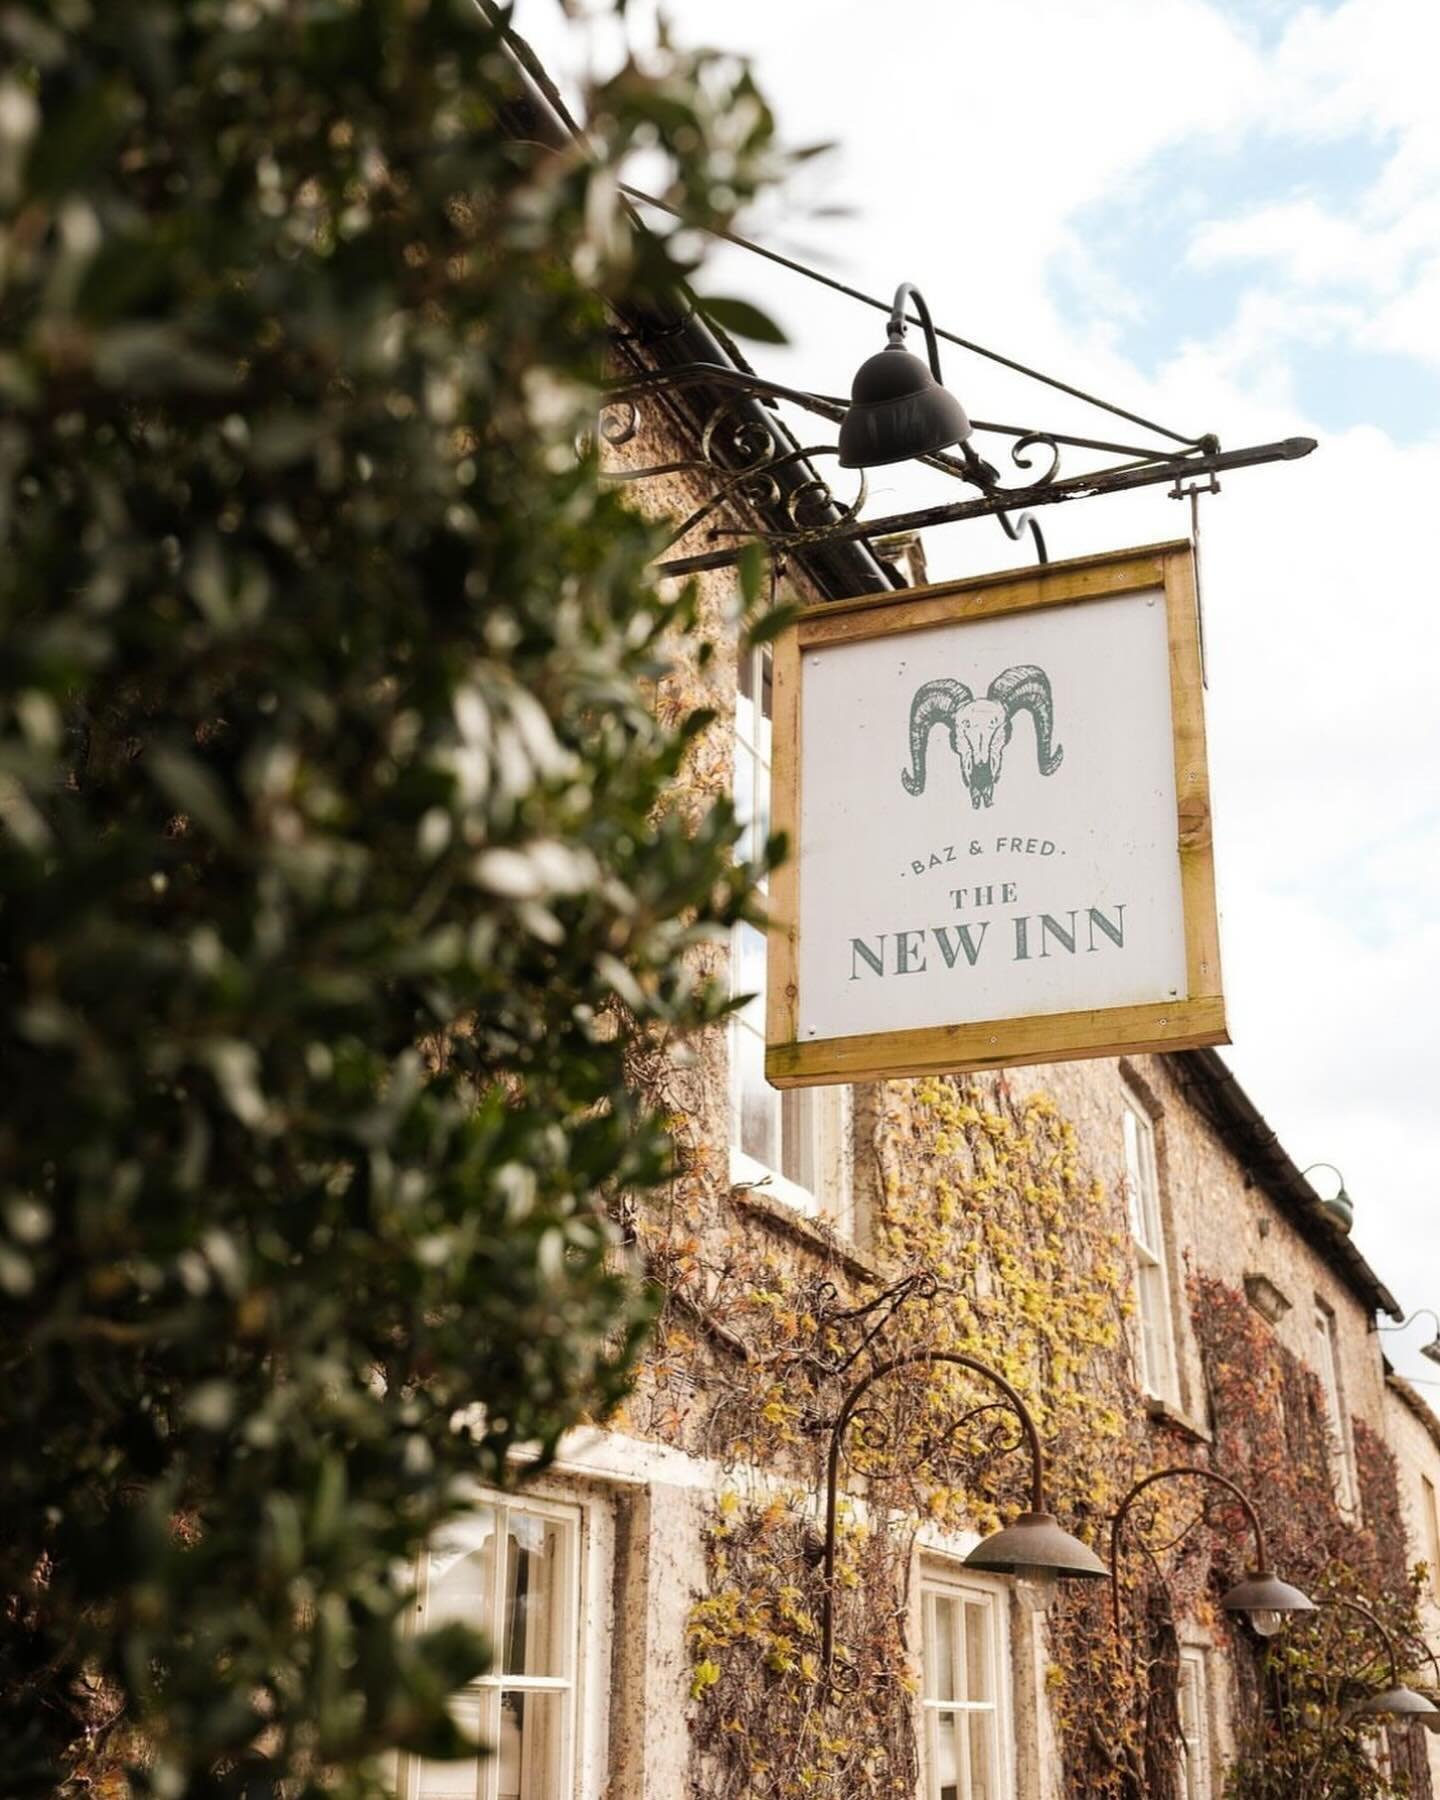 One of our favourite country pub recommendations . The New Inn at Coln St Aldwyns is just a 10 min drive from The Lodge. 

Fabulous food and drinks, a beautiful setting and friendly staff make this a definite visit during your stay. 

📸: @thenewinnc